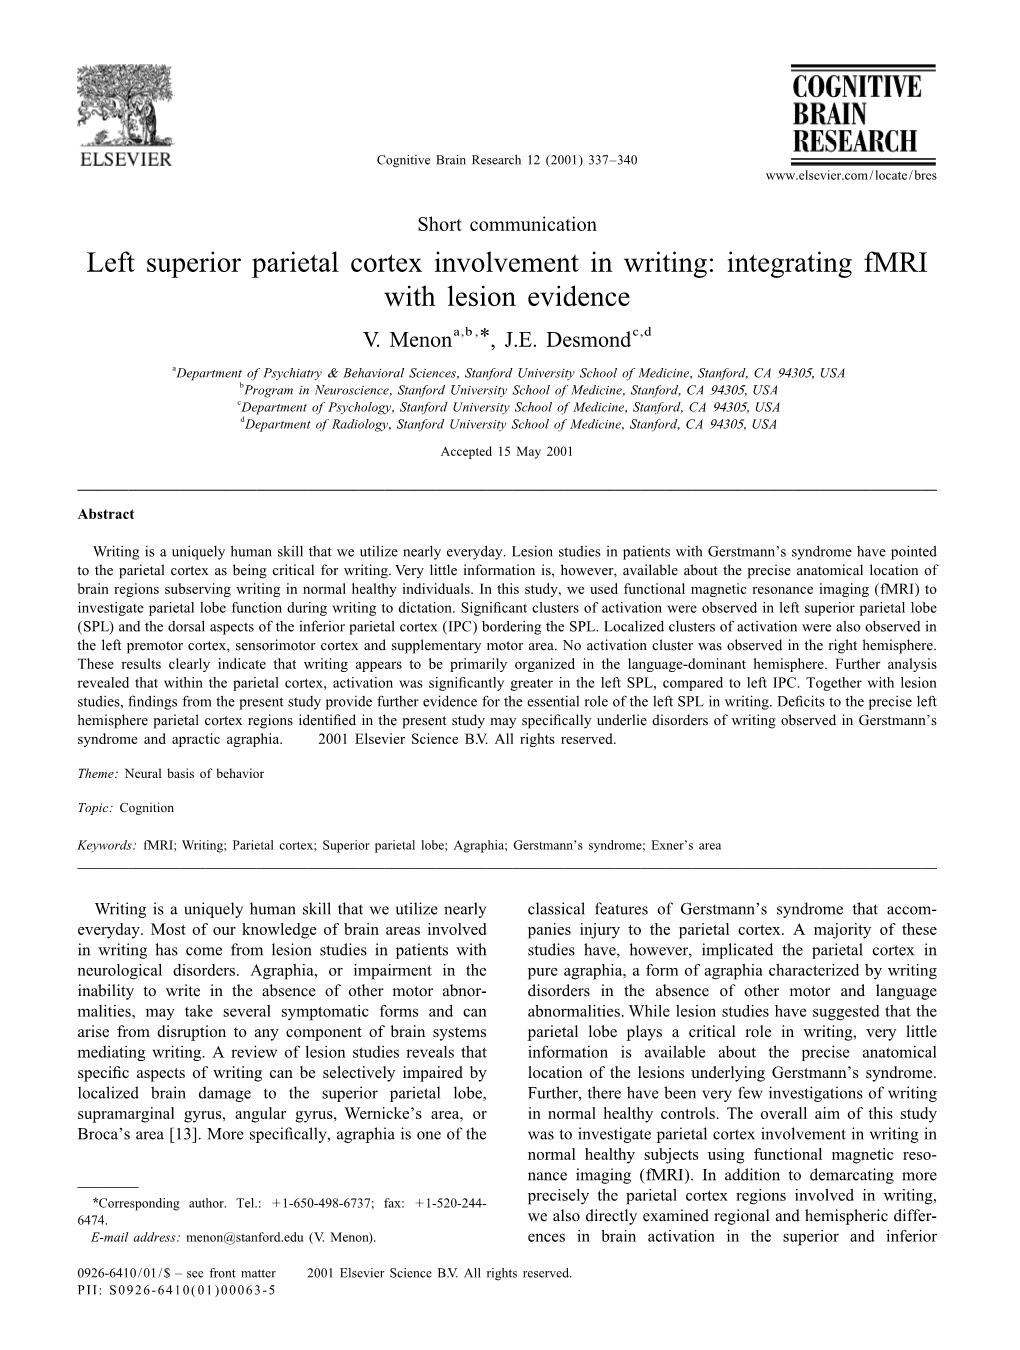 Left Superior Parietal Cortex Involvement in Writing: Integrating Fmri with Lesion Evidence V